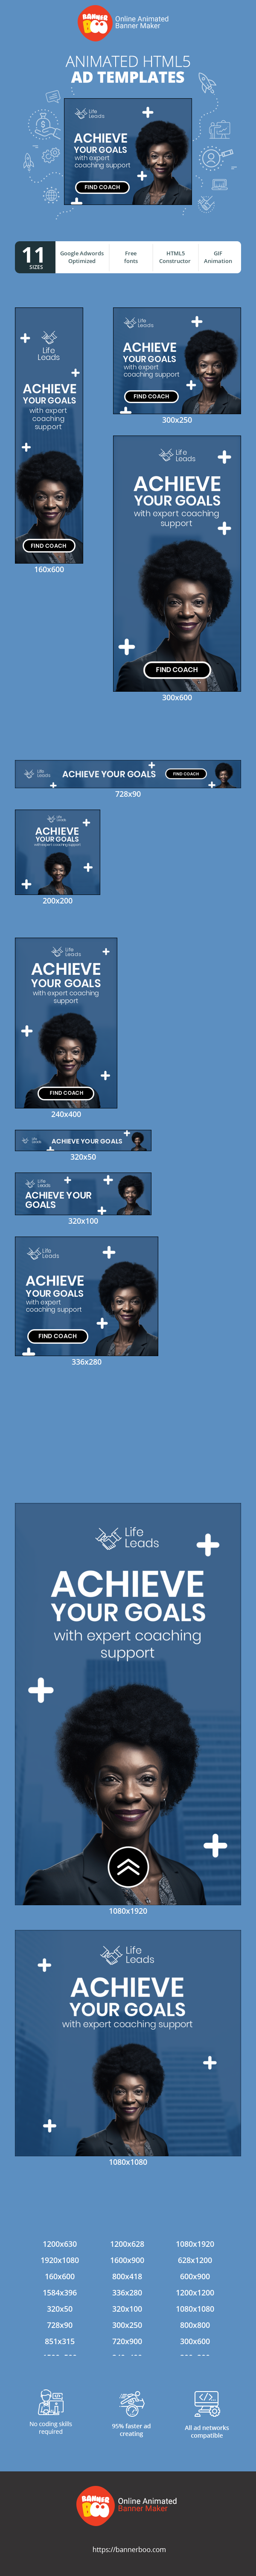 Шаблон рекламного банера — Achieve Your Goals — With Expert Coaching Support